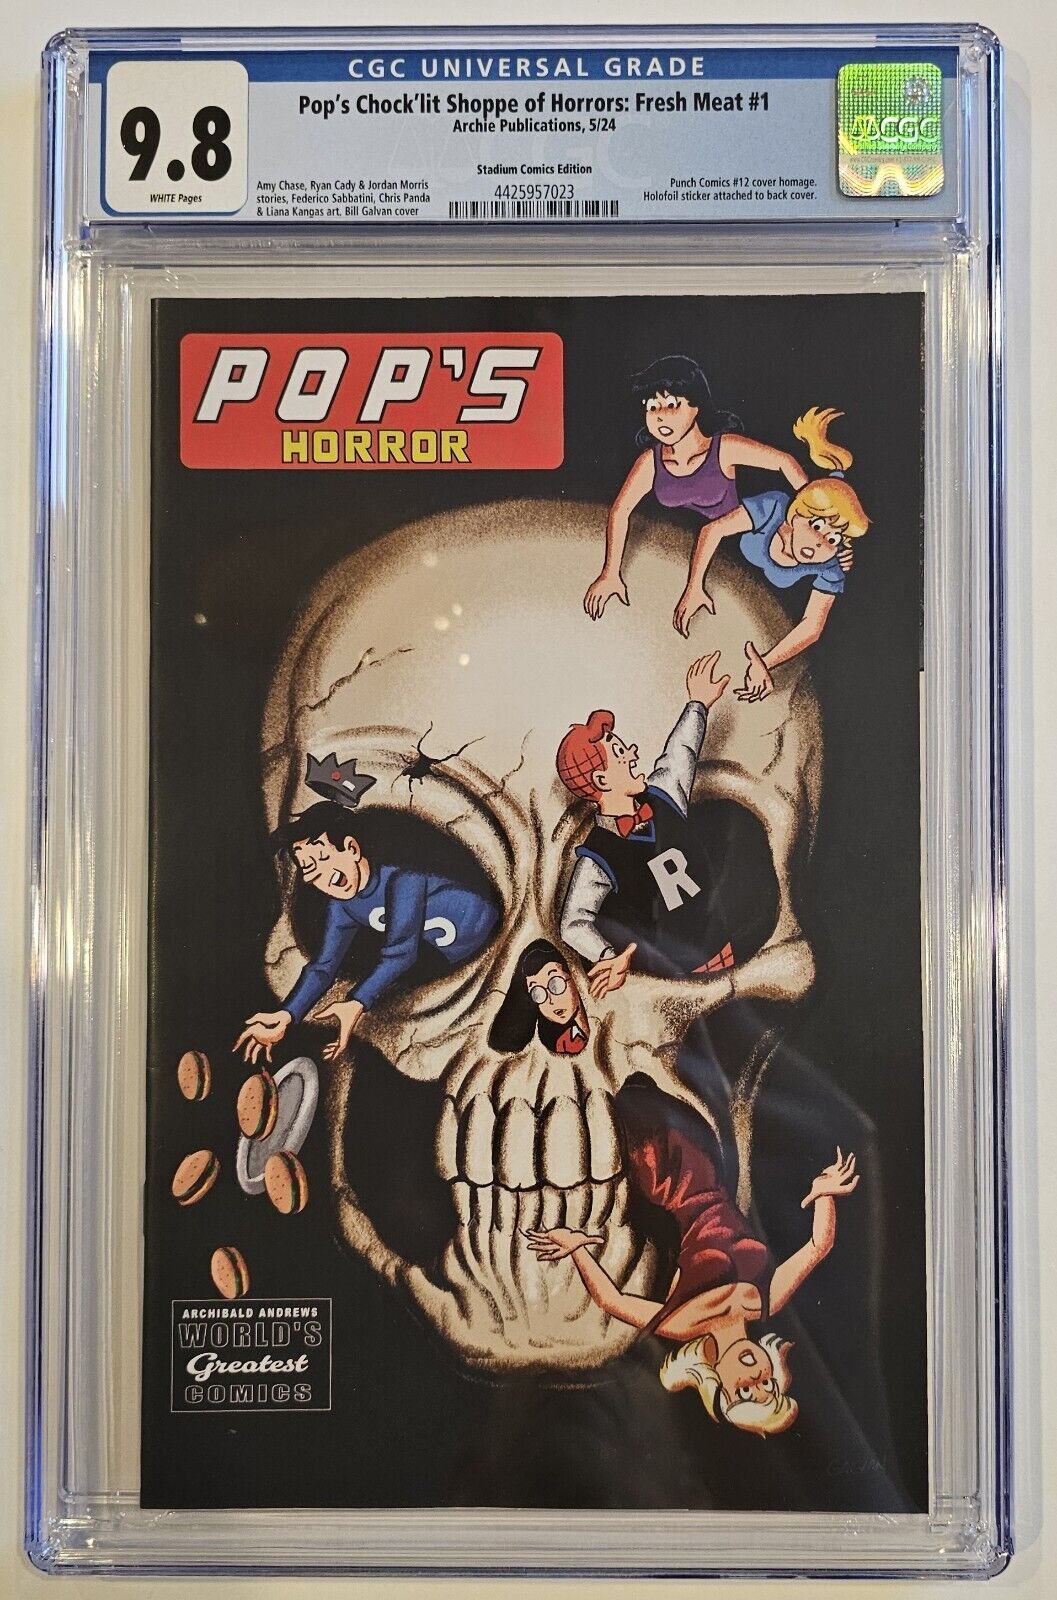 CGC 9.8 ARCHIE POP'S SHOPPE OF HORRORS 1 FRESH MEAT PUNCH COMICS #12 HOMAGE RARE